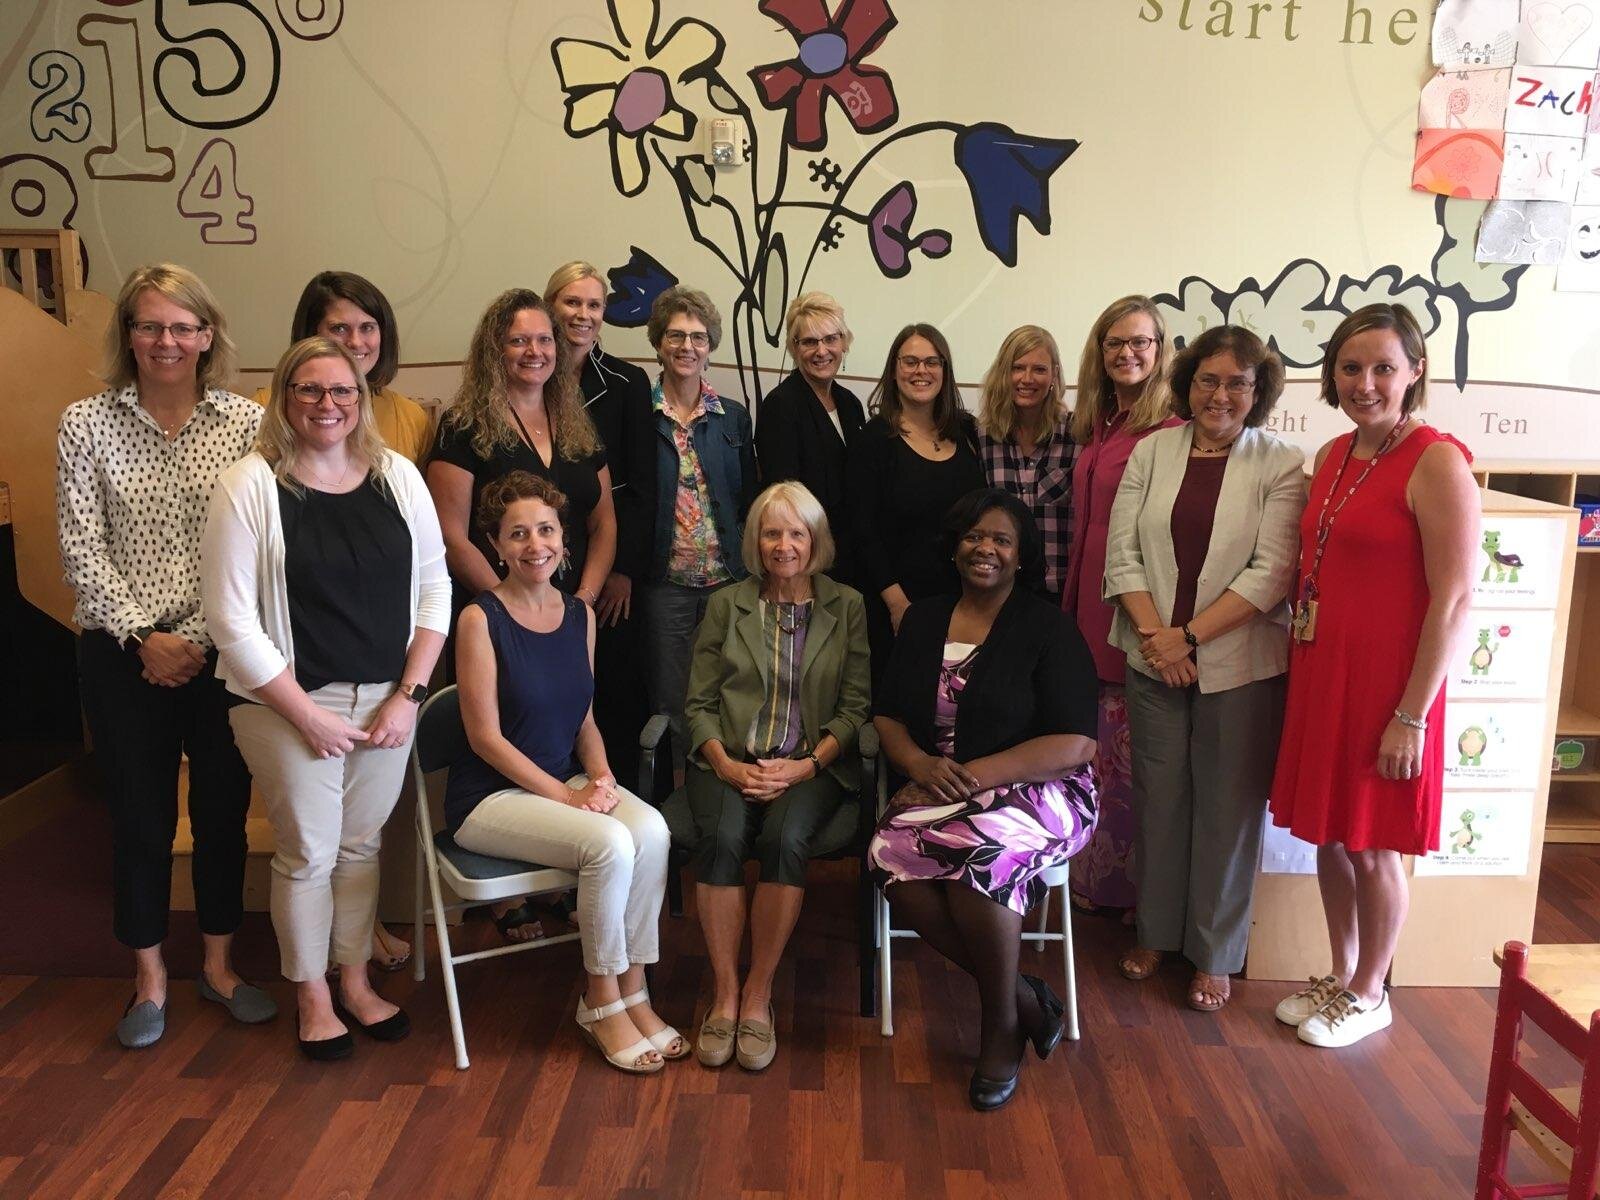  Wisconsin First Lady Kathleen Evers (seated, center) met with State Superintendent Stanford Taylor, Dept. of Children and Families Policy Initiatives Advisor Fredi Bove, Director of the Office of Children’s Mental Health Linda Hall, WI-AIMH Executiv